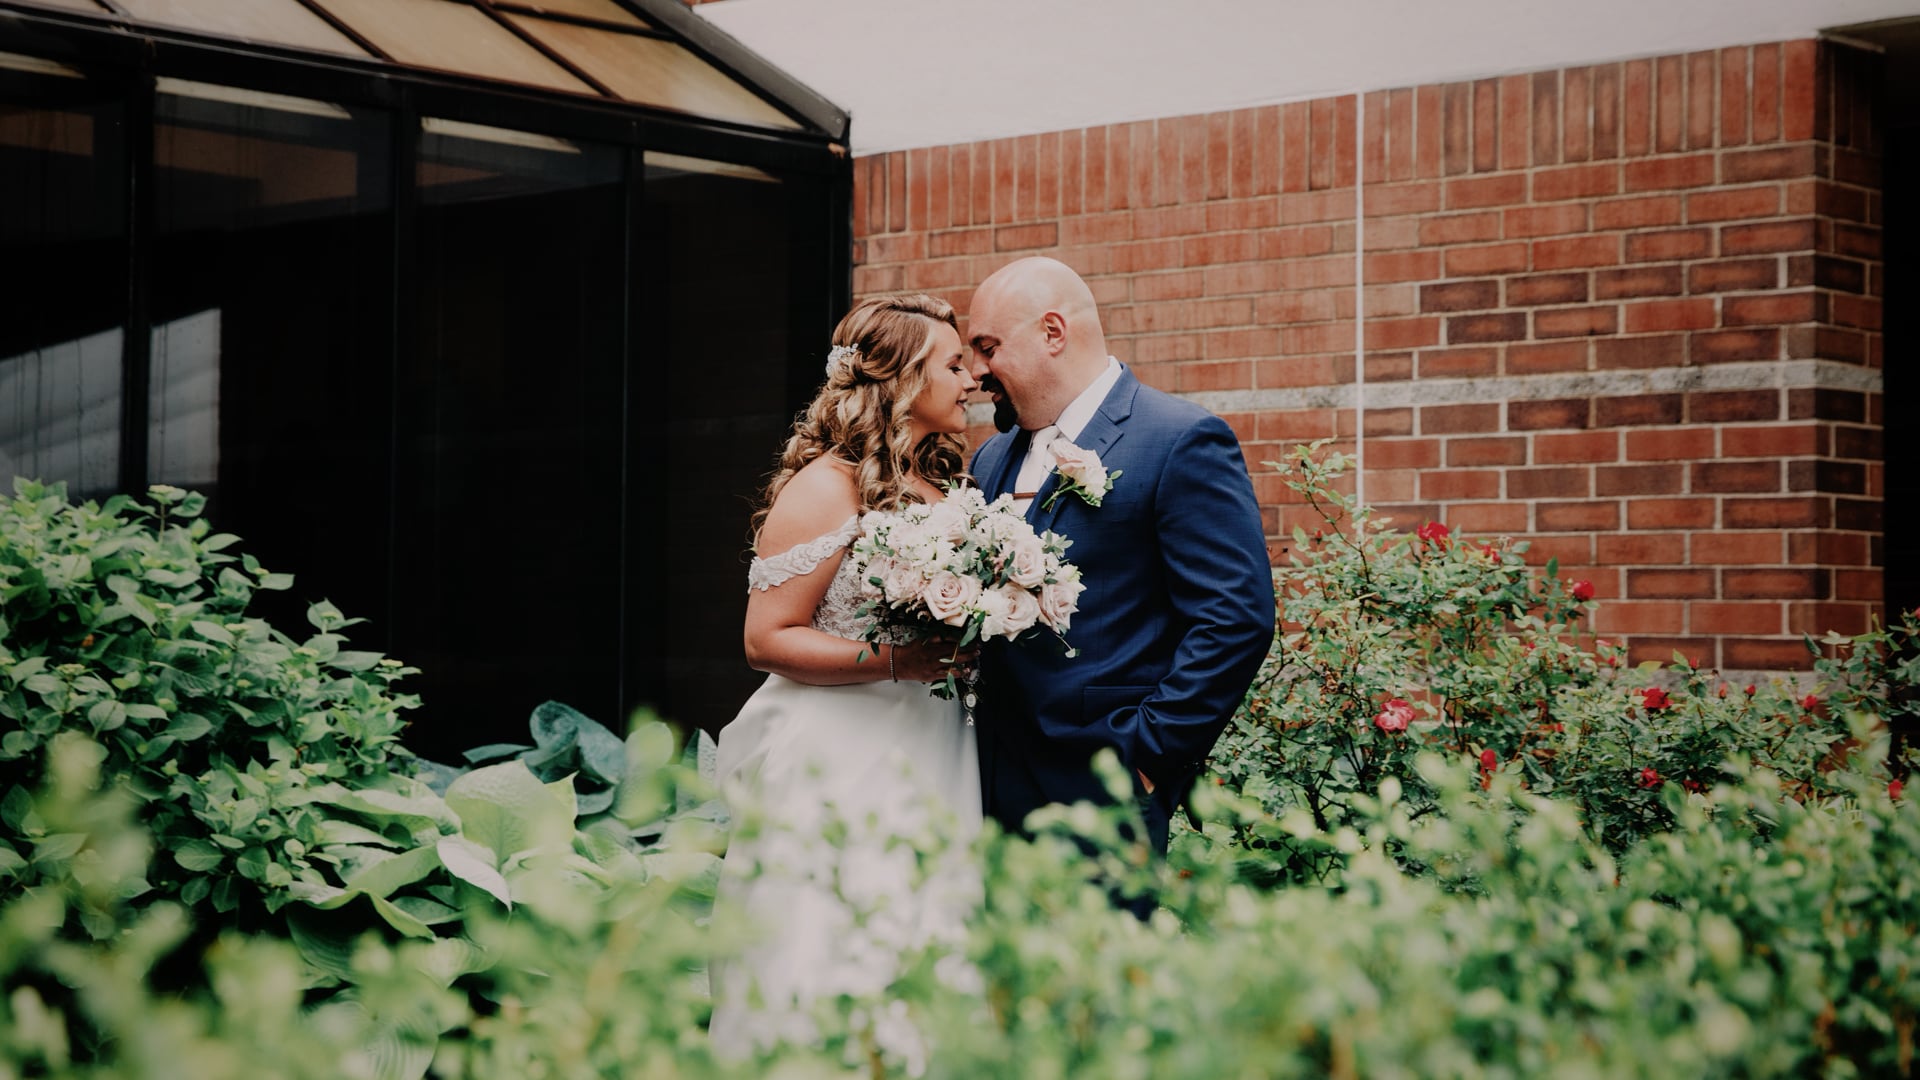 Jessica & Vincent | May 30th, 2021